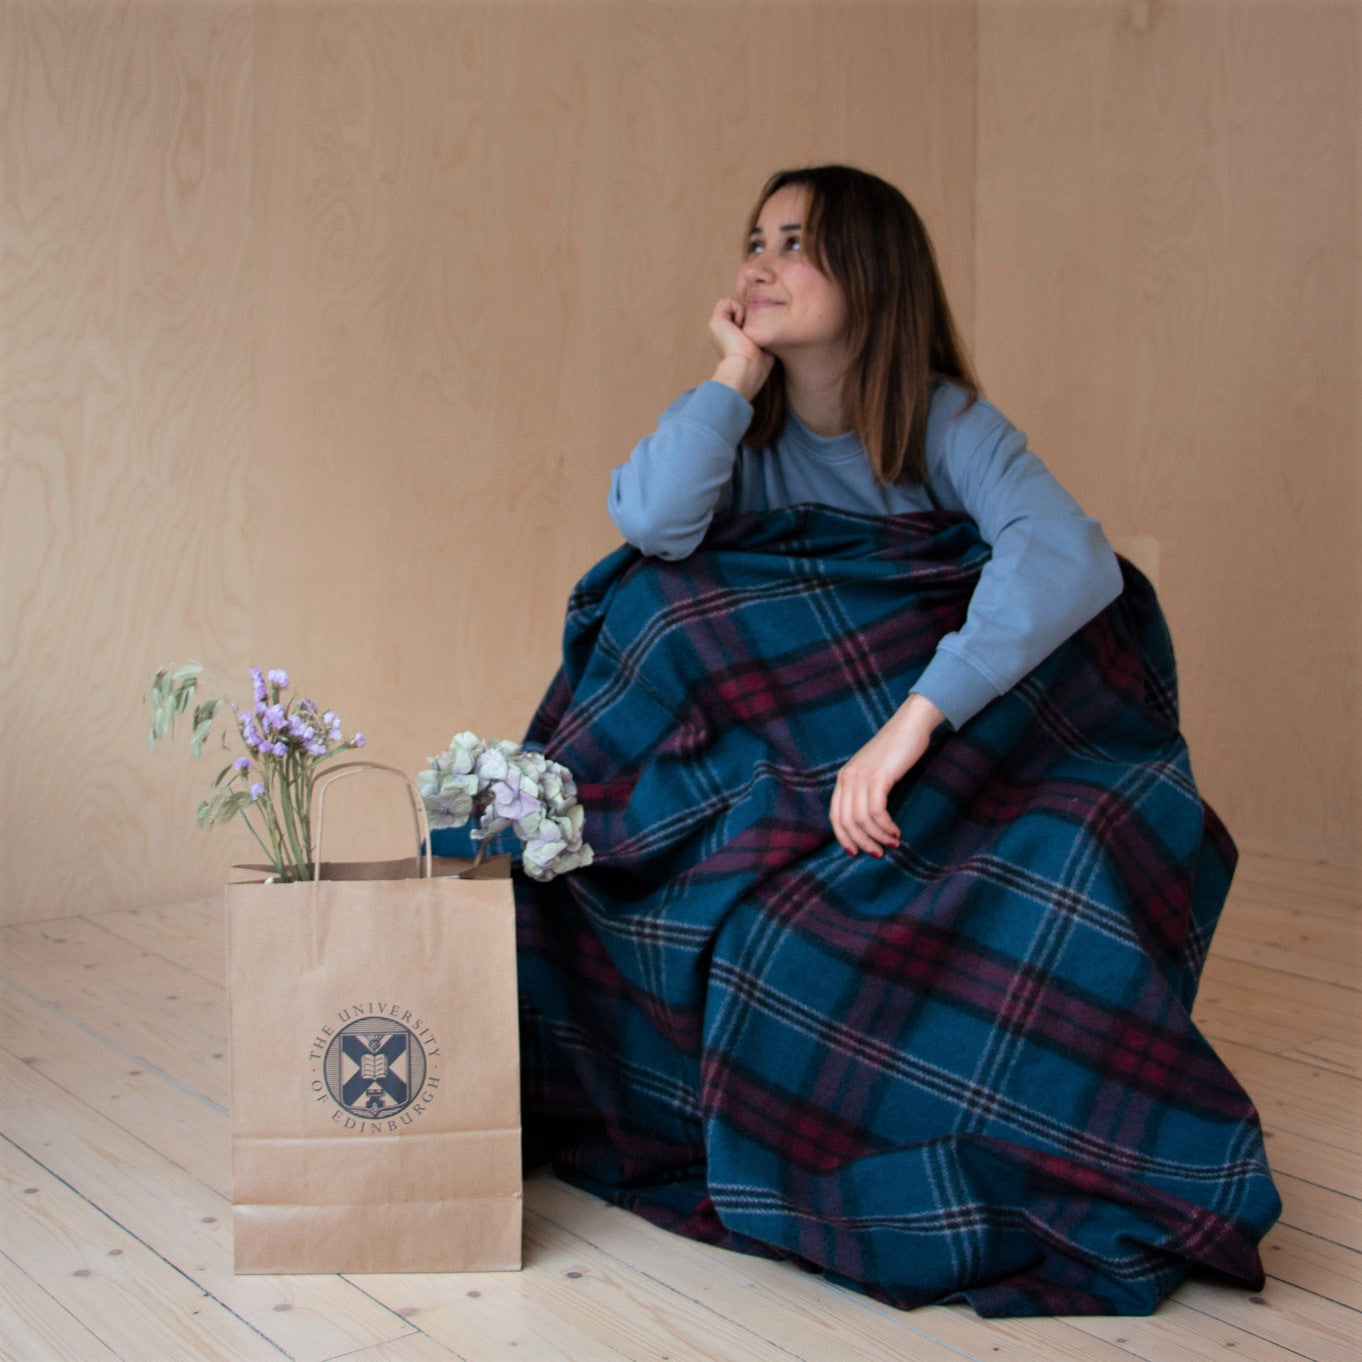 our model under the university tartan blanket wearing the embroidered crest sweatshirt in stone blue